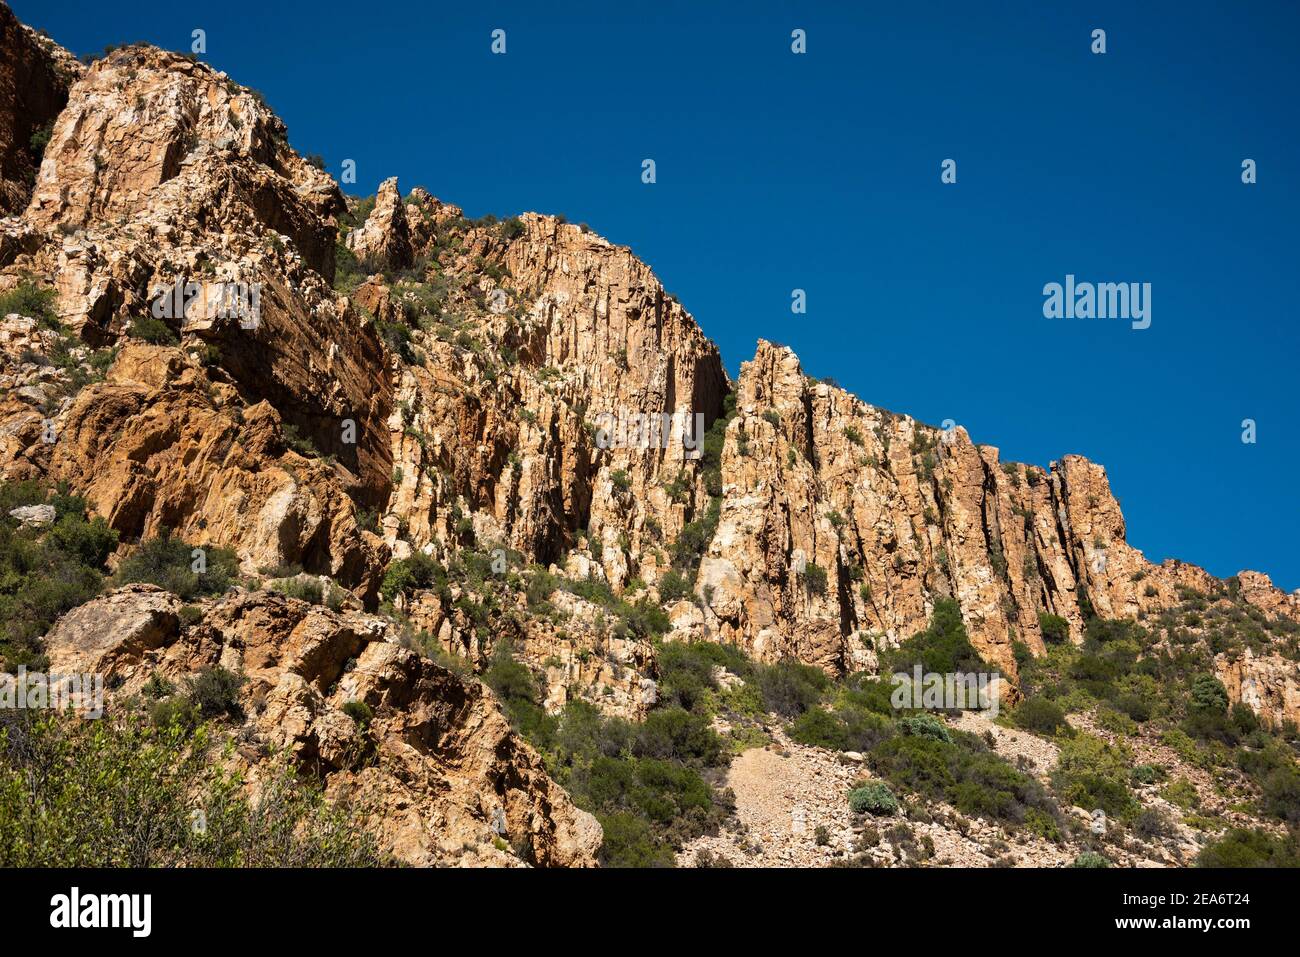 Rock formations, Baviaanskloof, South Africa Stock Photo